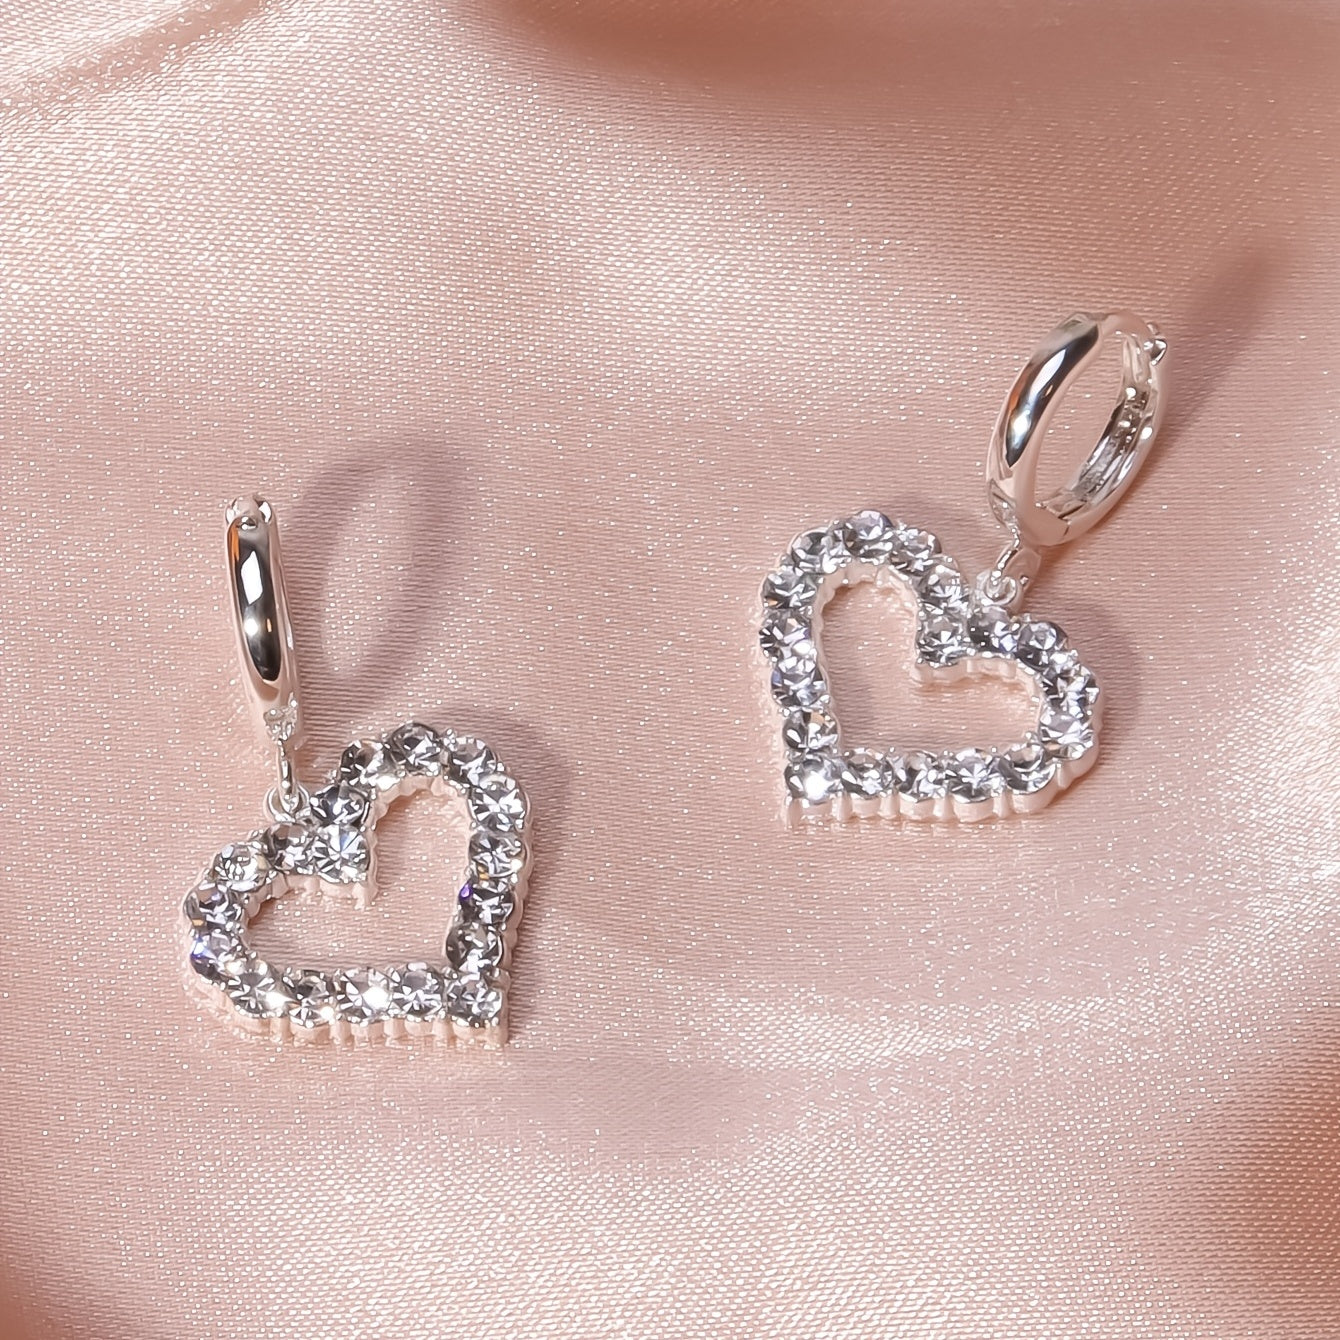 Hollow Heart-Shaped Full Rhinestone Drop Hoop Earrings Silver Plated Delicate Jewelry For Women Girls Valentines Day Decoration Gifts